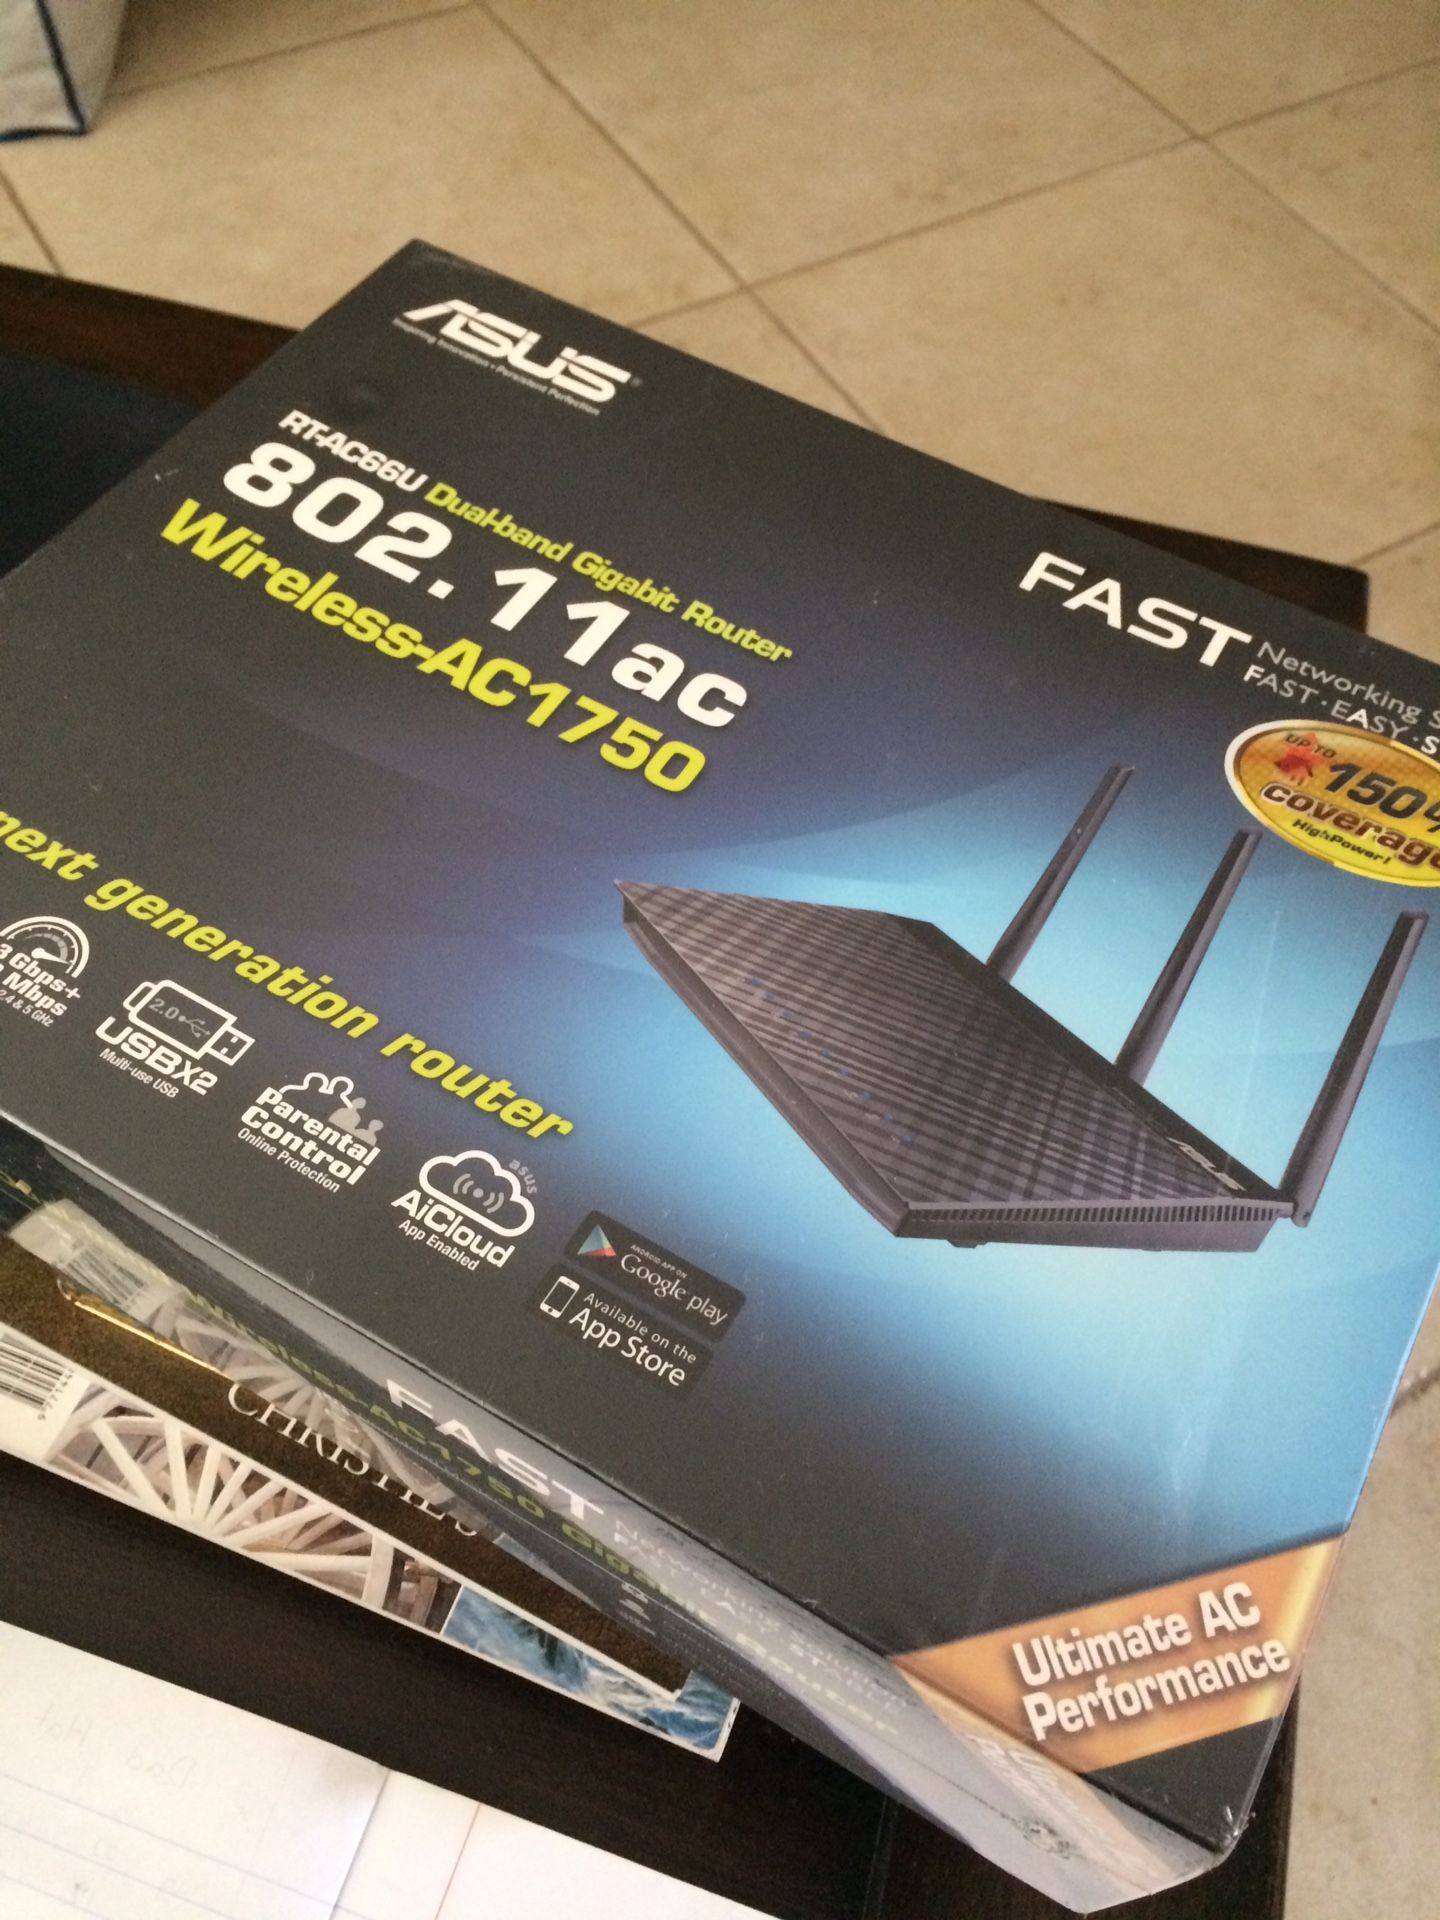 ASUS Router New